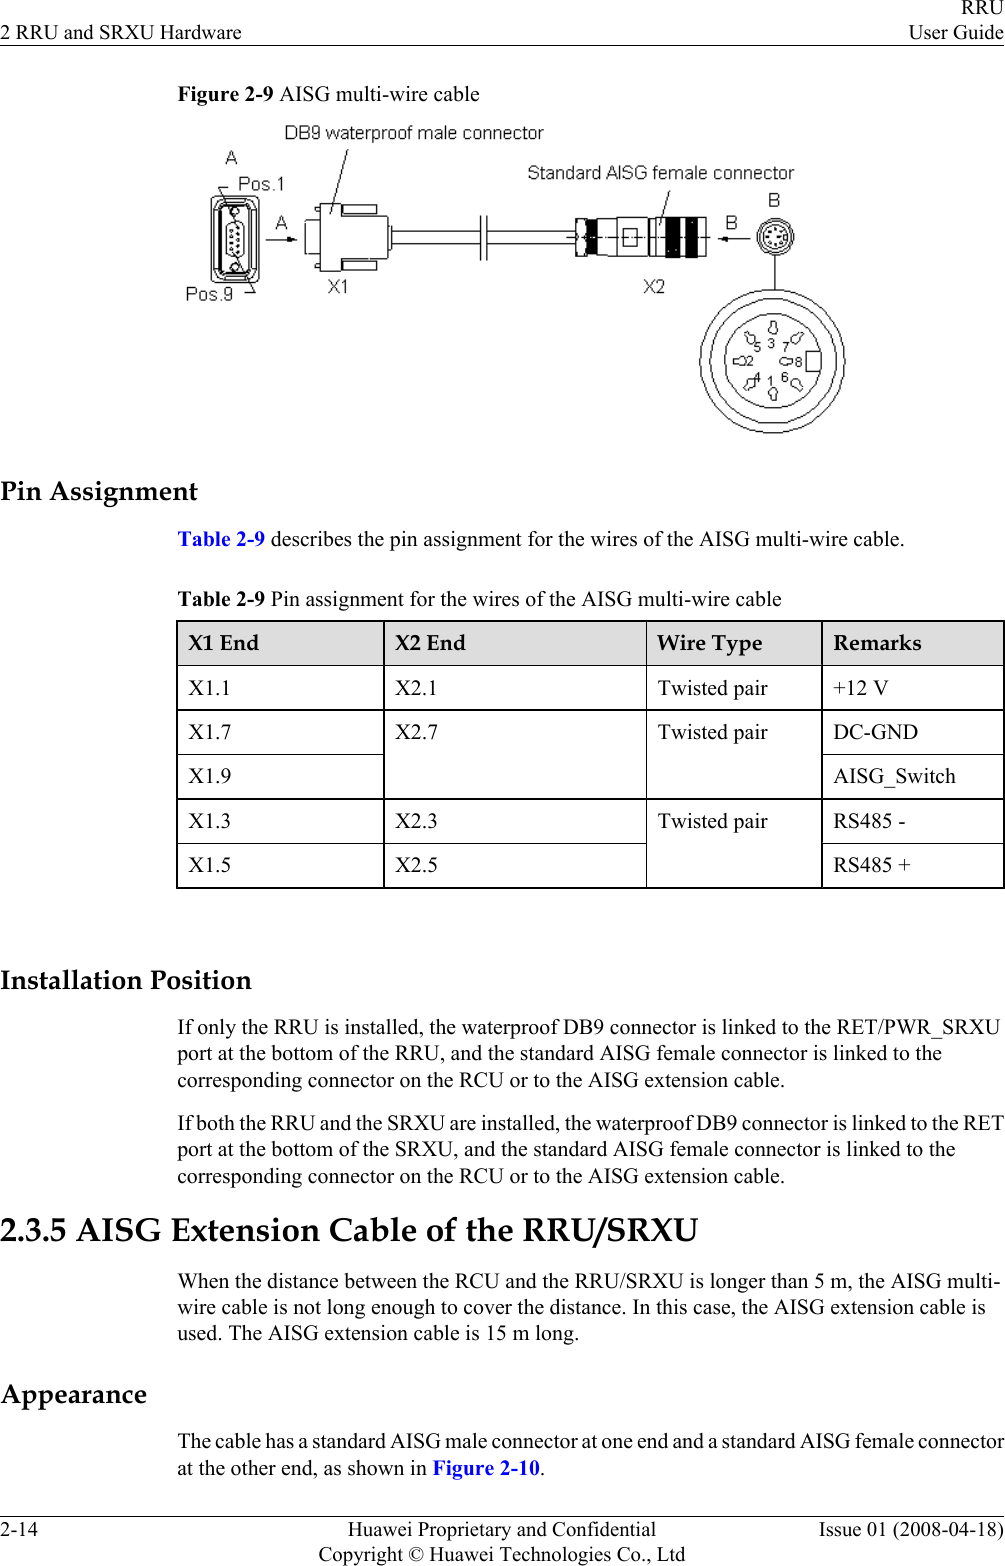 Figure 2-9 AISG multi-wire cablePin AssignmentTable 2-9 describes the pin assignment for the wires of the AISG multi-wire cable.Table 2-9 Pin assignment for the wires of the AISG multi-wire cableX1 End X2 End Wire Type RemarksX1.1 X2.1 Twisted pair +12 VX1.7 X2.7 Twisted pair DC-GNDX1.9 AISG_SwitchX1.3 X2.3 Twisted pair RS485 -X1.5 X2.5 RS485 + Installation PositionIf only the RRU is installed, the waterproof DB9 connector is linked to the RET/PWR_SRXUport at the bottom of the RRU, and the standard AISG female connector is linked to thecorresponding connector on the RCU or to the AISG extension cable.If both the RRU and the SRXU are installed, the waterproof DB9 connector is linked to the RETport at the bottom of the SRXU, and the standard AISG female connector is linked to thecorresponding connector on the RCU or to the AISG extension cable.2.3.5 AISG Extension Cable of the RRU/SRXUWhen the distance between the RCU and the RRU/SRXU is longer than 5 m, the AISG multi-wire cable is not long enough to cover the distance. In this case, the AISG extension cable isused. The AISG extension cable is 15 m long.AppearanceThe cable has a standard AISG male connector at one end and a standard AISG female connectorat the other end, as shown in Figure 2-10.2 RRU and SRXU HardwareRRUUser Guide2-14 Huawei Proprietary and ConfidentialCopyright © Huawei Technologies Co., LtdIssue 01 (2008-04-18)